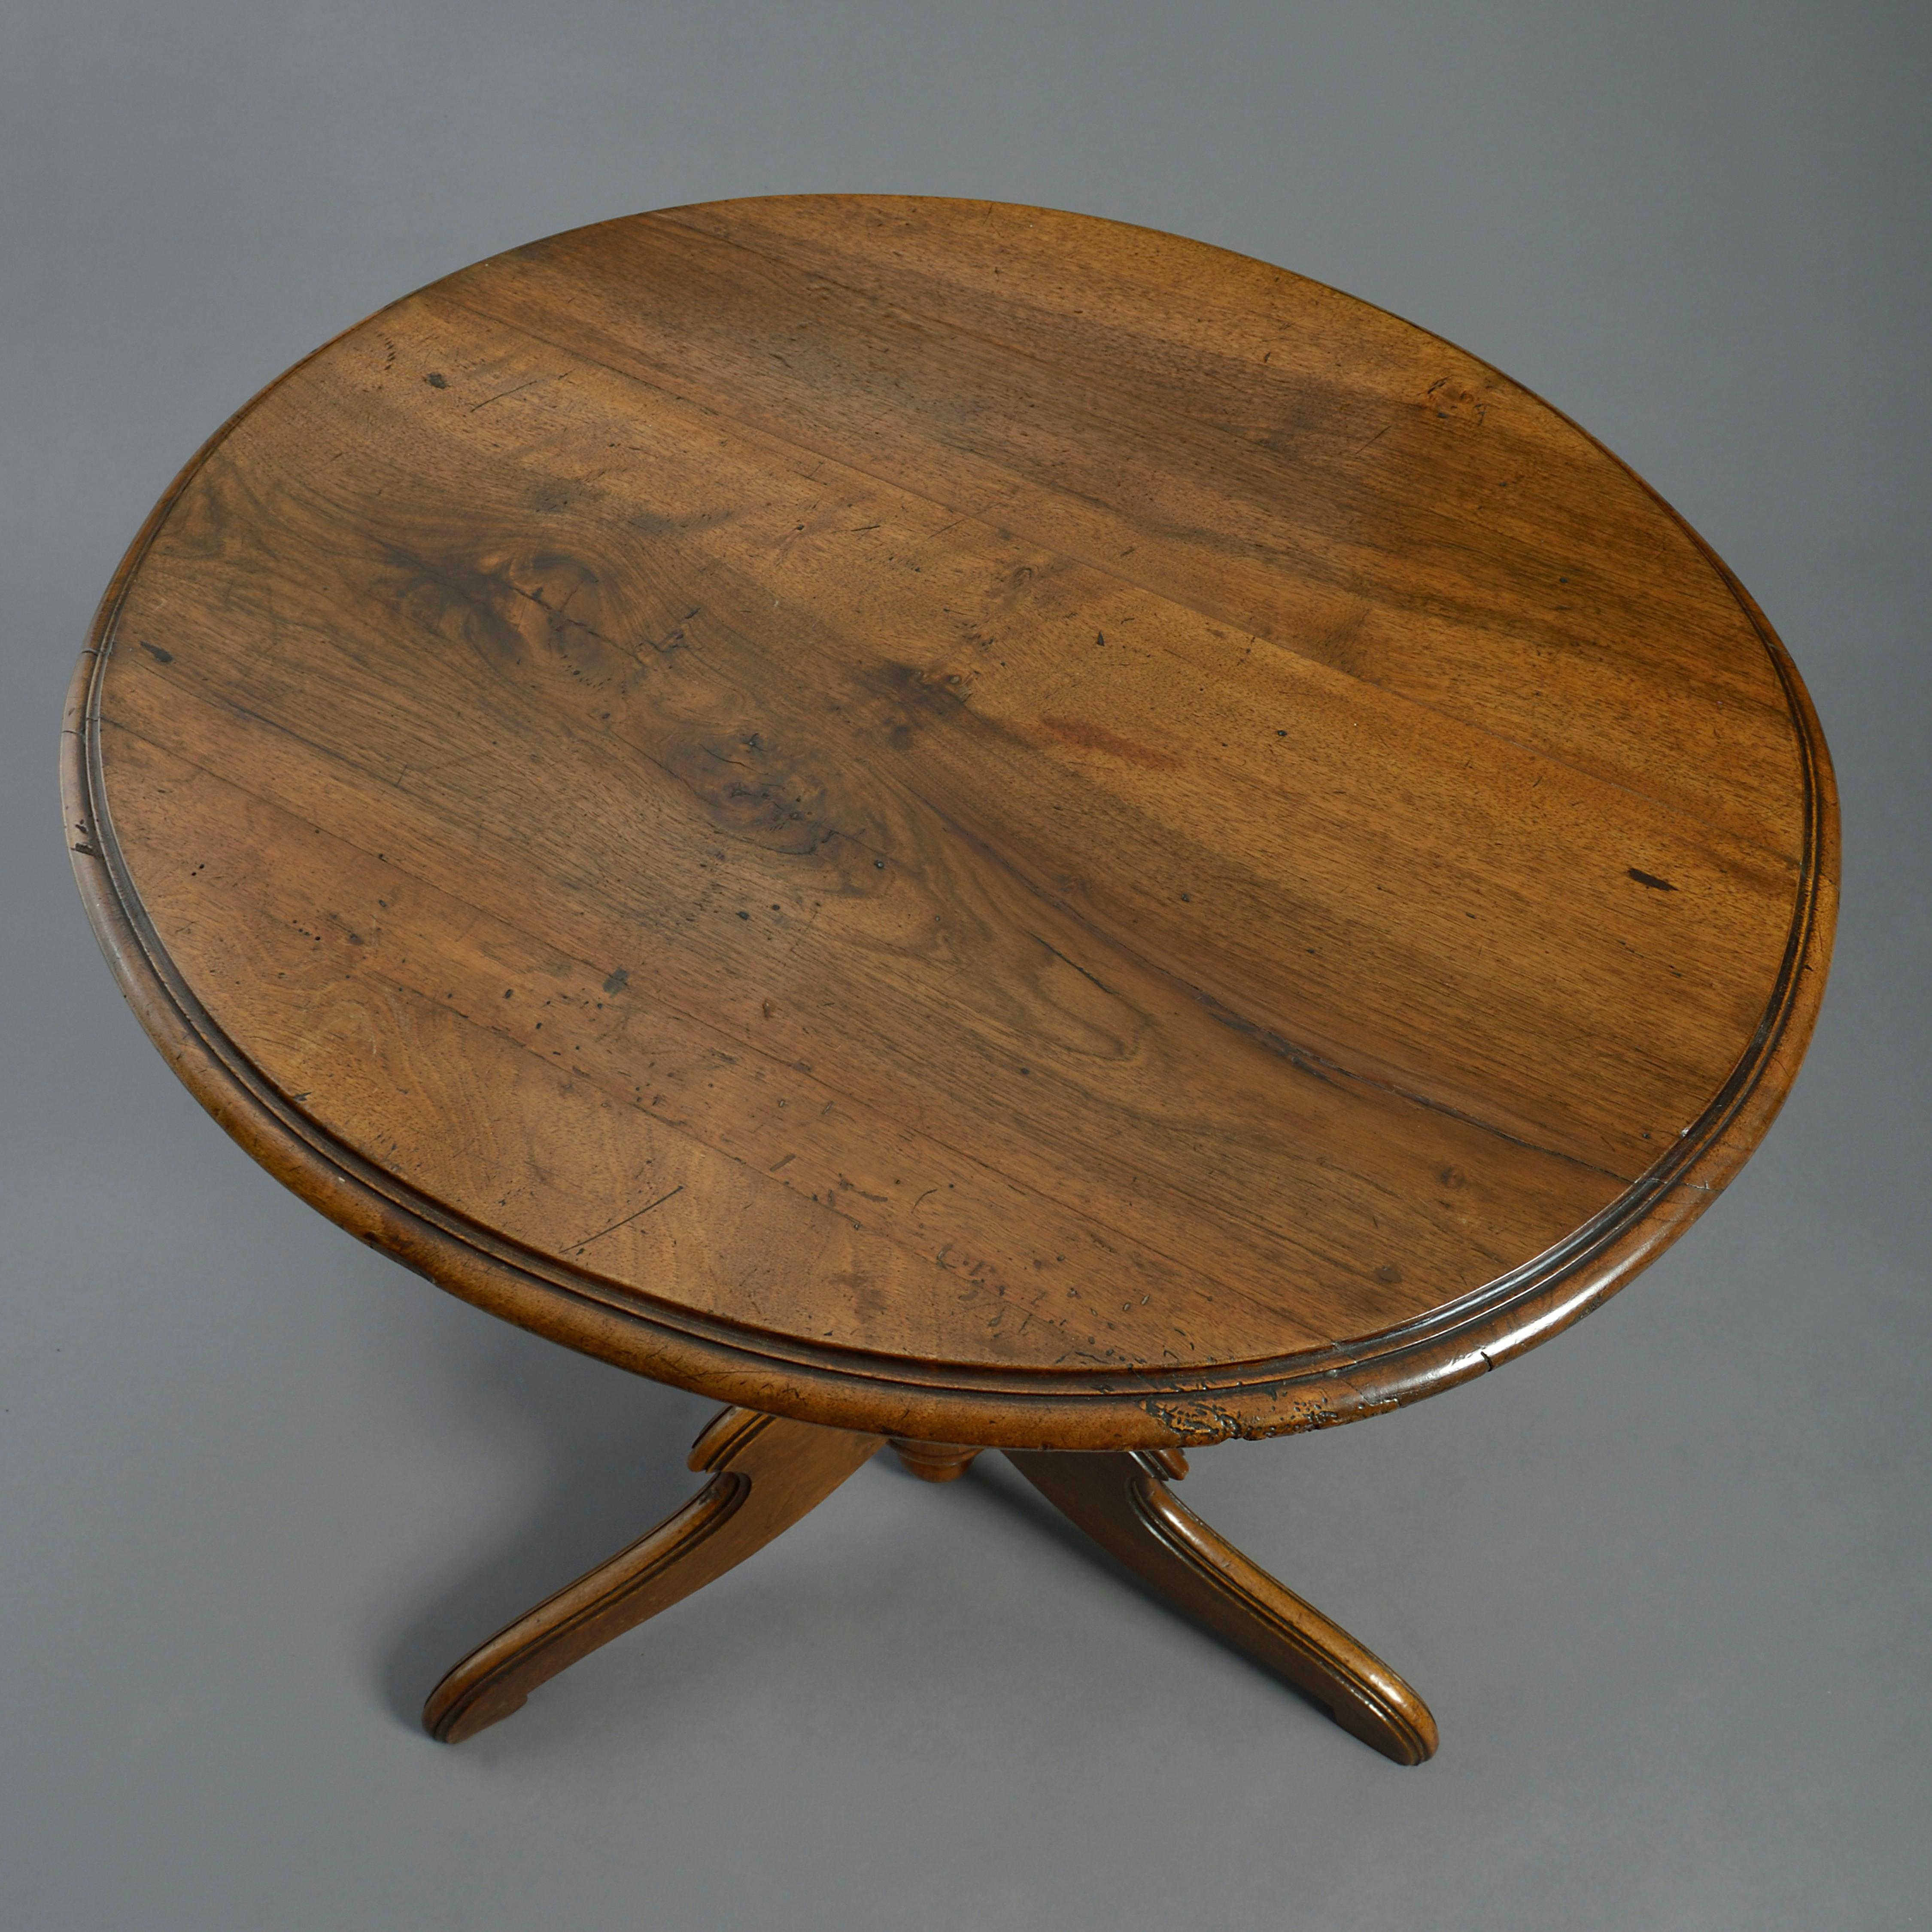 Rustic Early 19th Century Walnut Occasional Table